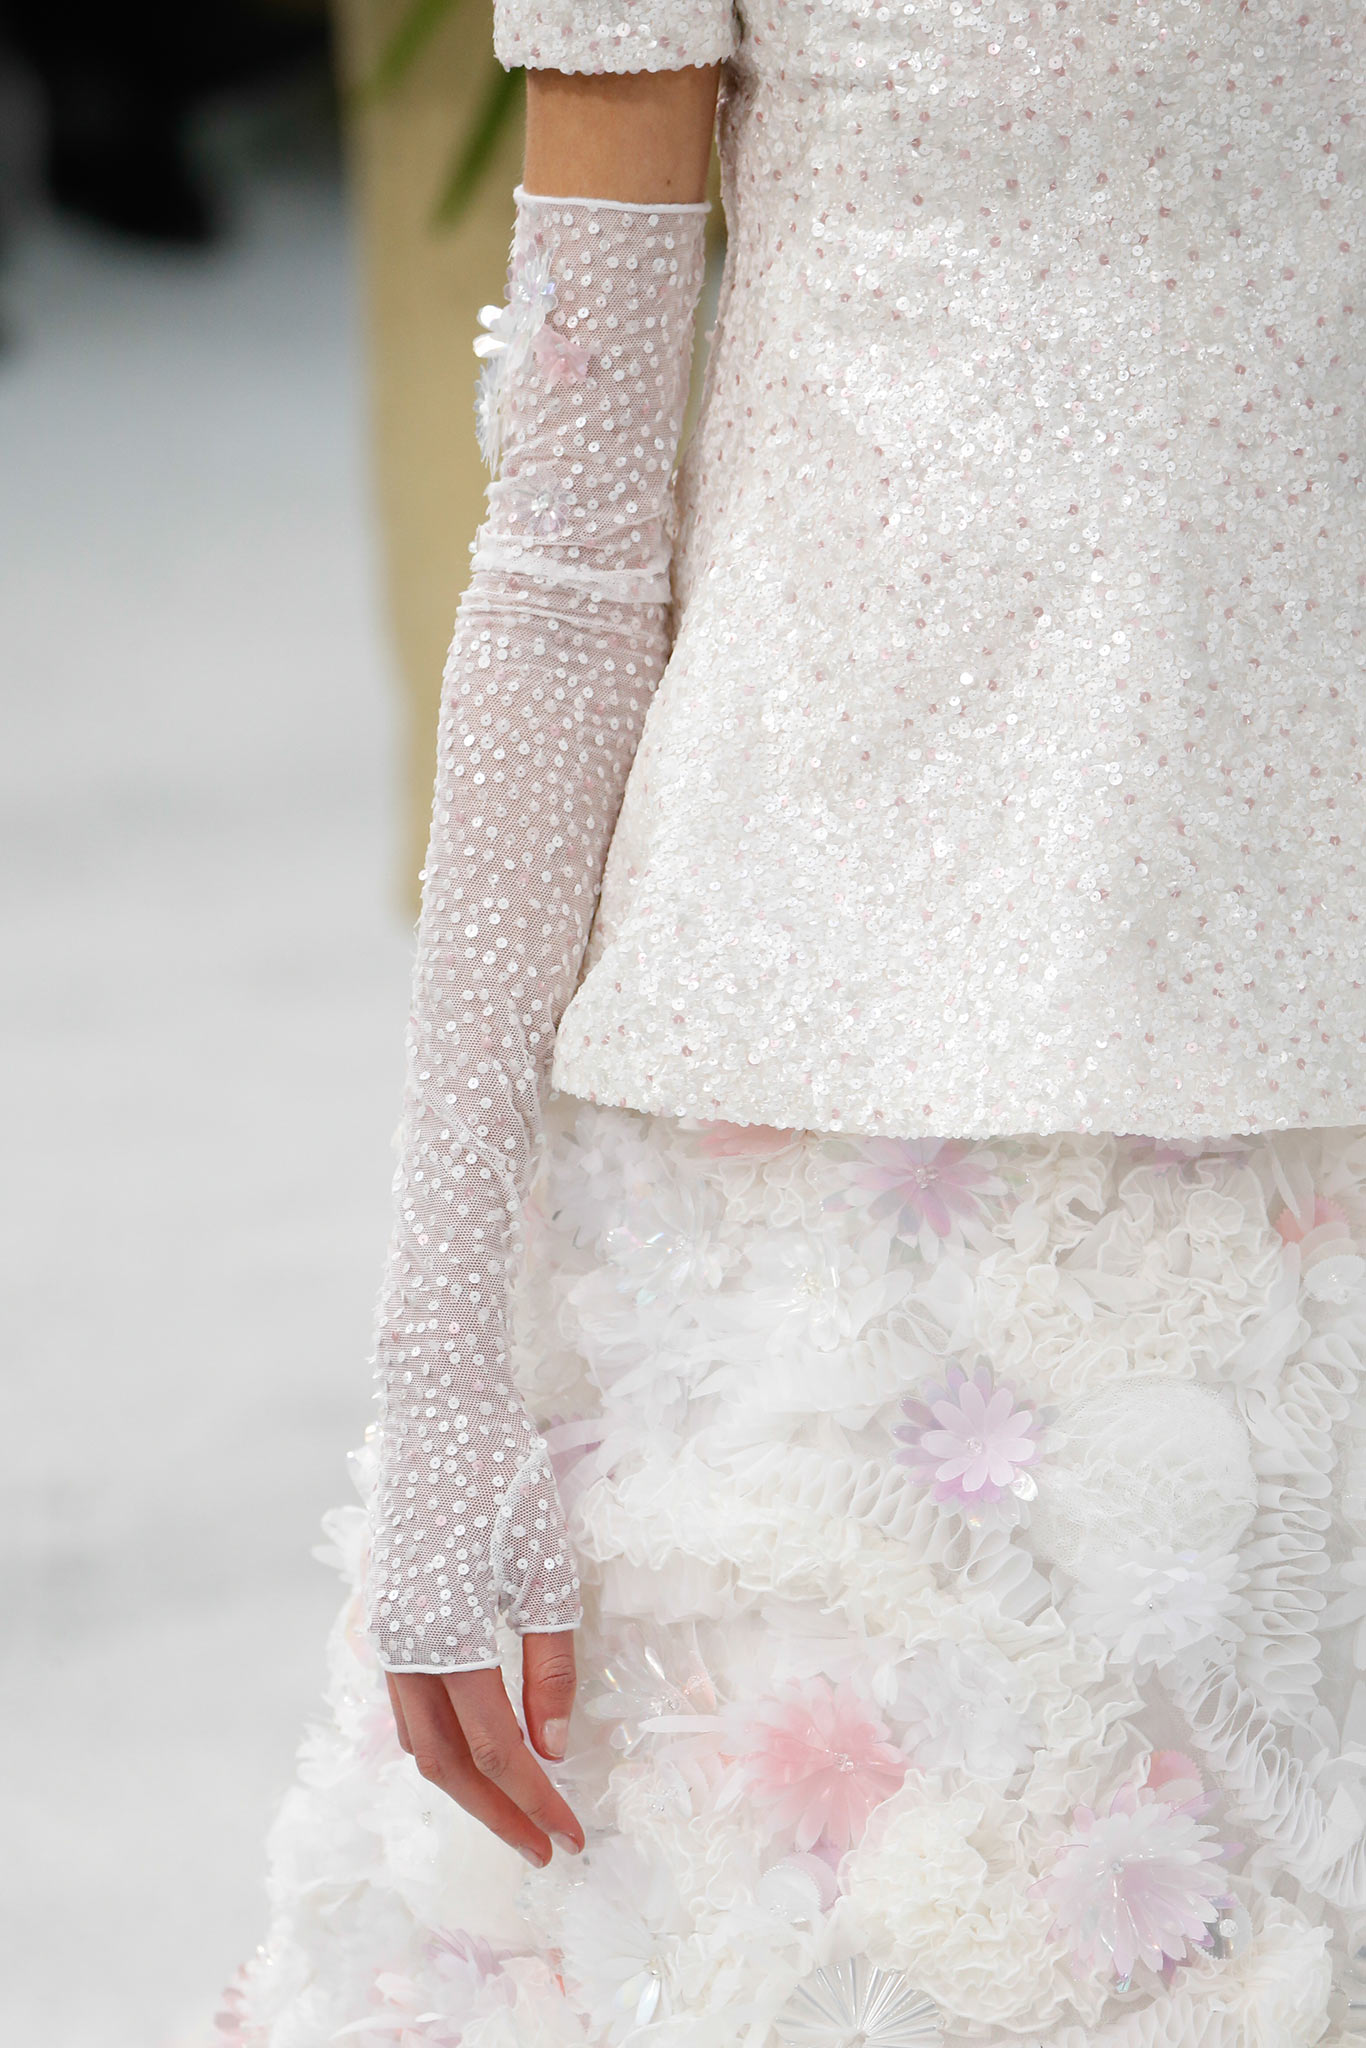 Chanel Plays Up The Classic Suit For Haute Couture